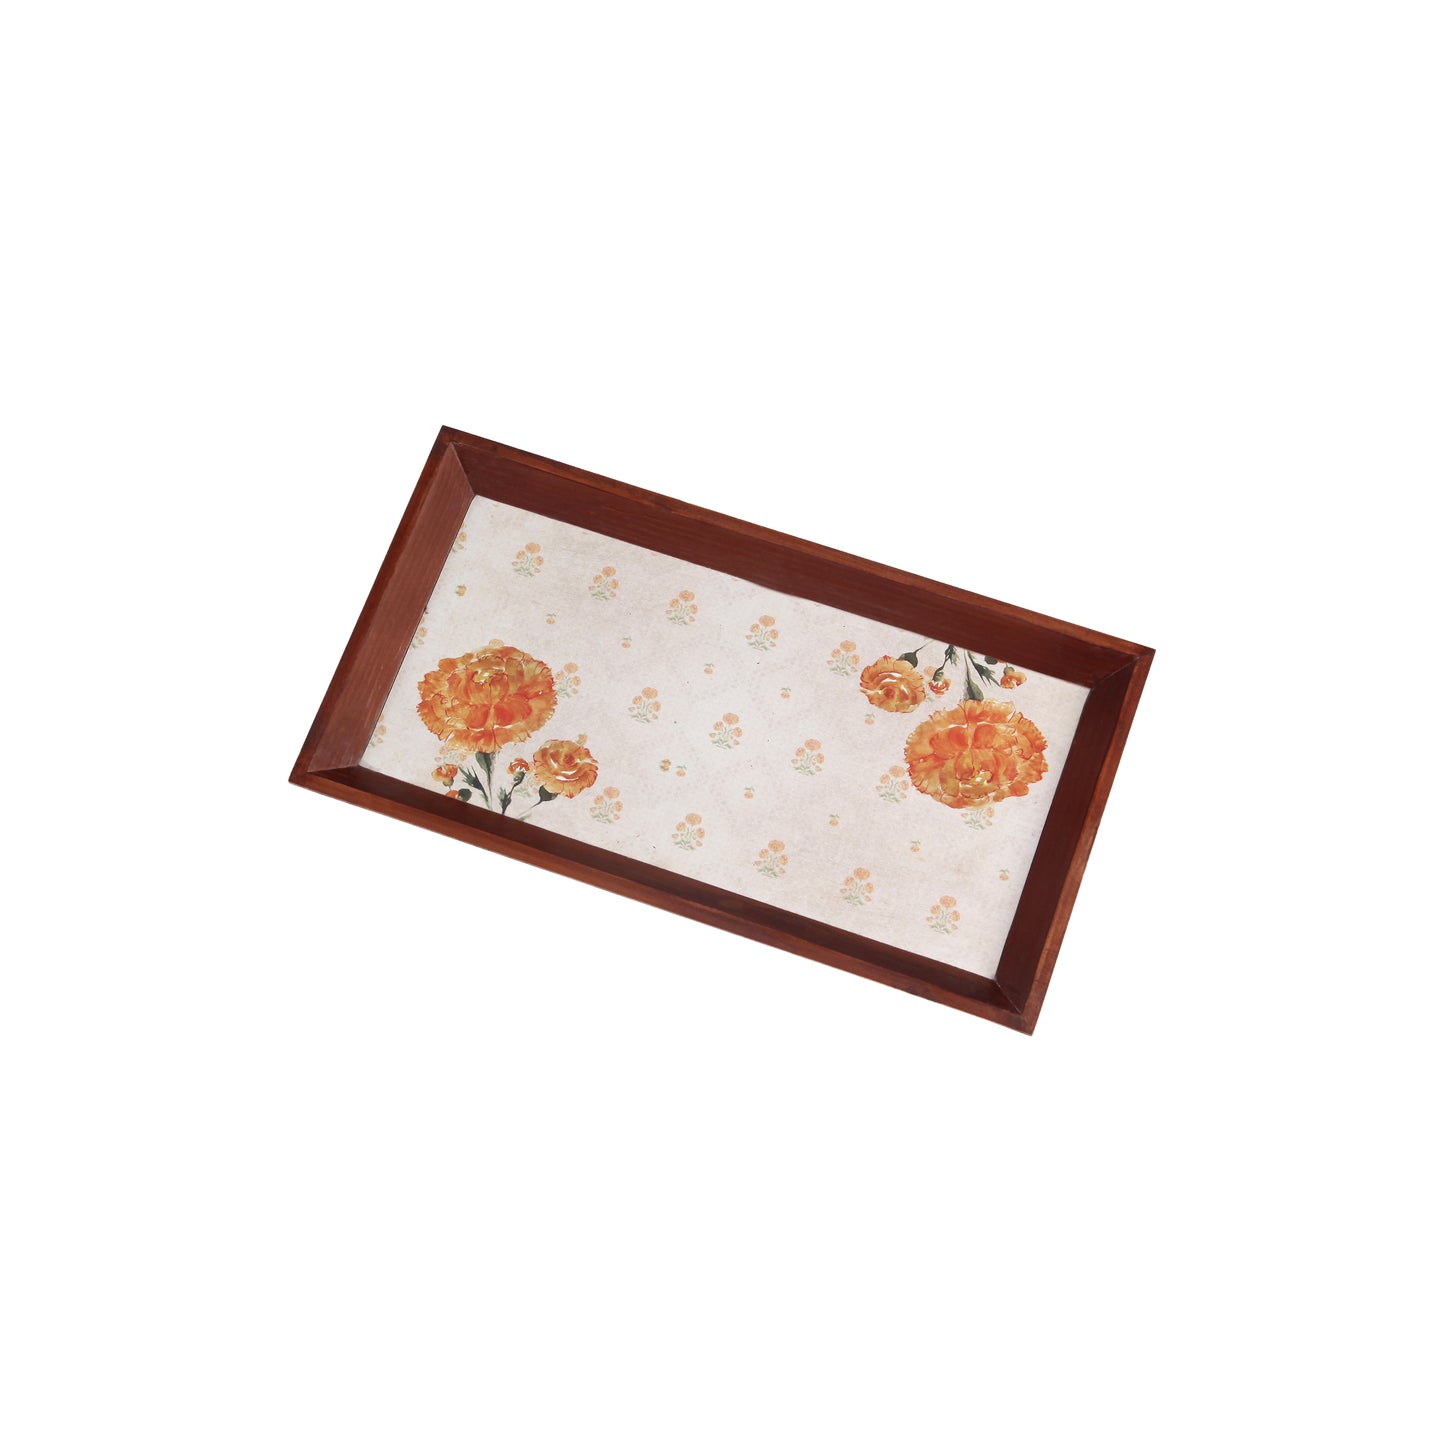 A Tiny Mistake Marigold Rectangle Wooden Serving Tray, 35 x 20 x 2 cm